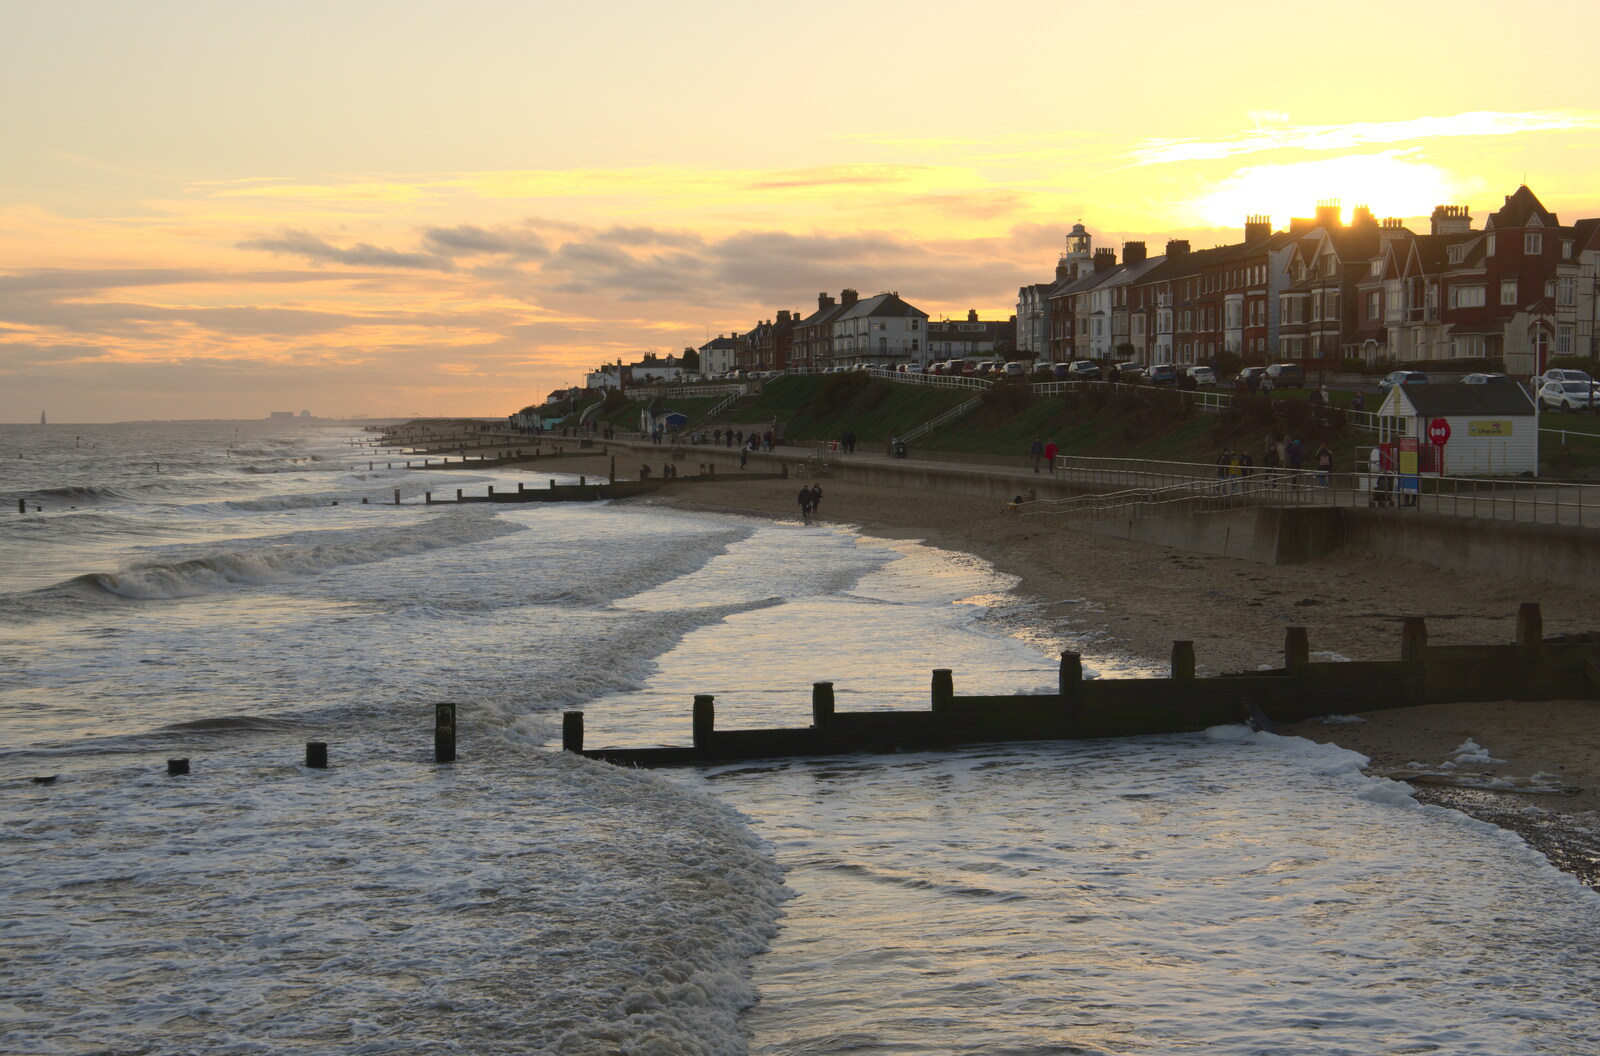 A view of Southwold in the setting sun from A Return to the Beach, Southwold, Suffolk - 20th December 2020